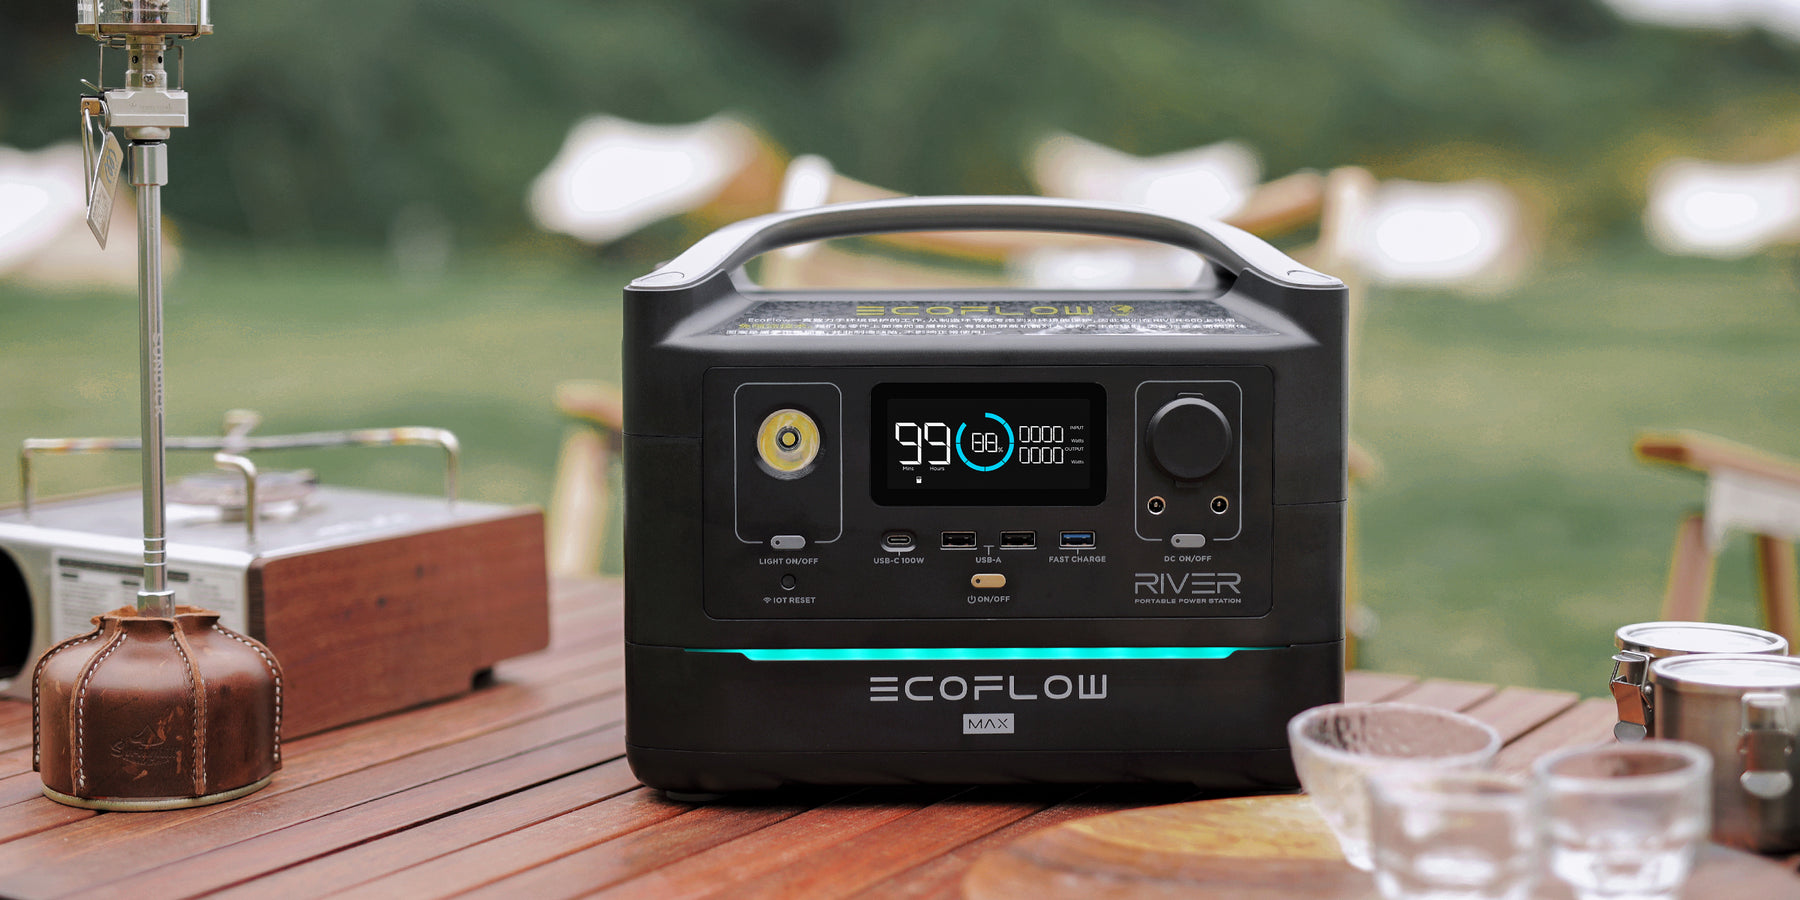 The world’s fastest charging portable power stations